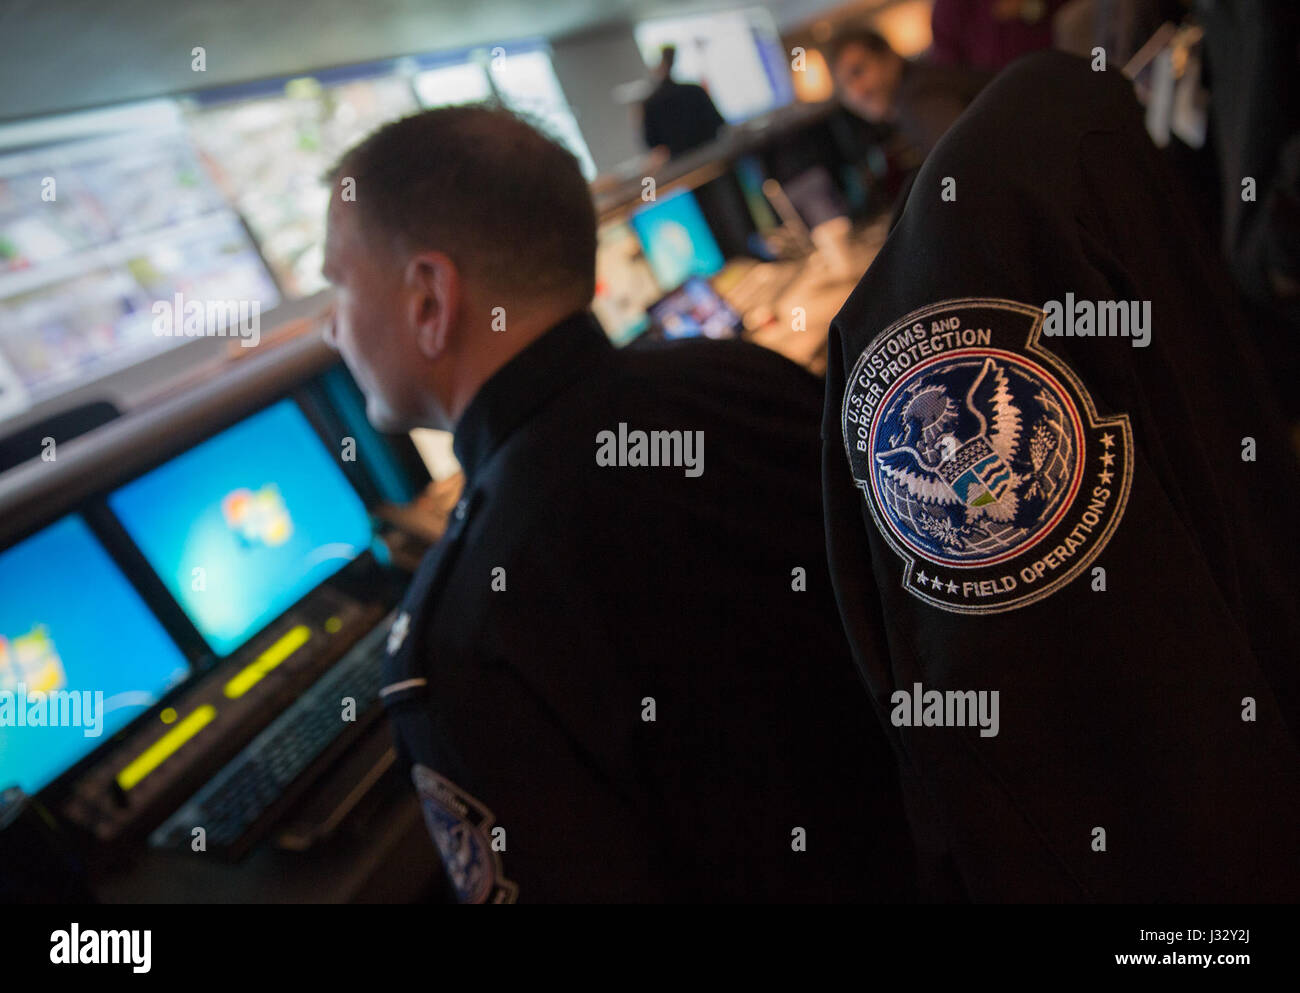 Officer Anthony Scafuri of U.S. Customs and Border Protection Office of Field Operations, works alongside a contingent of local, state and federal law enforcement agencies at the Houston Police Department's emergency operations center to ensure security of Super Bowl LI Feb 3, 2017.  U.S. Customs and Border Protection Photo by Glenn Fawcett Stock Photo